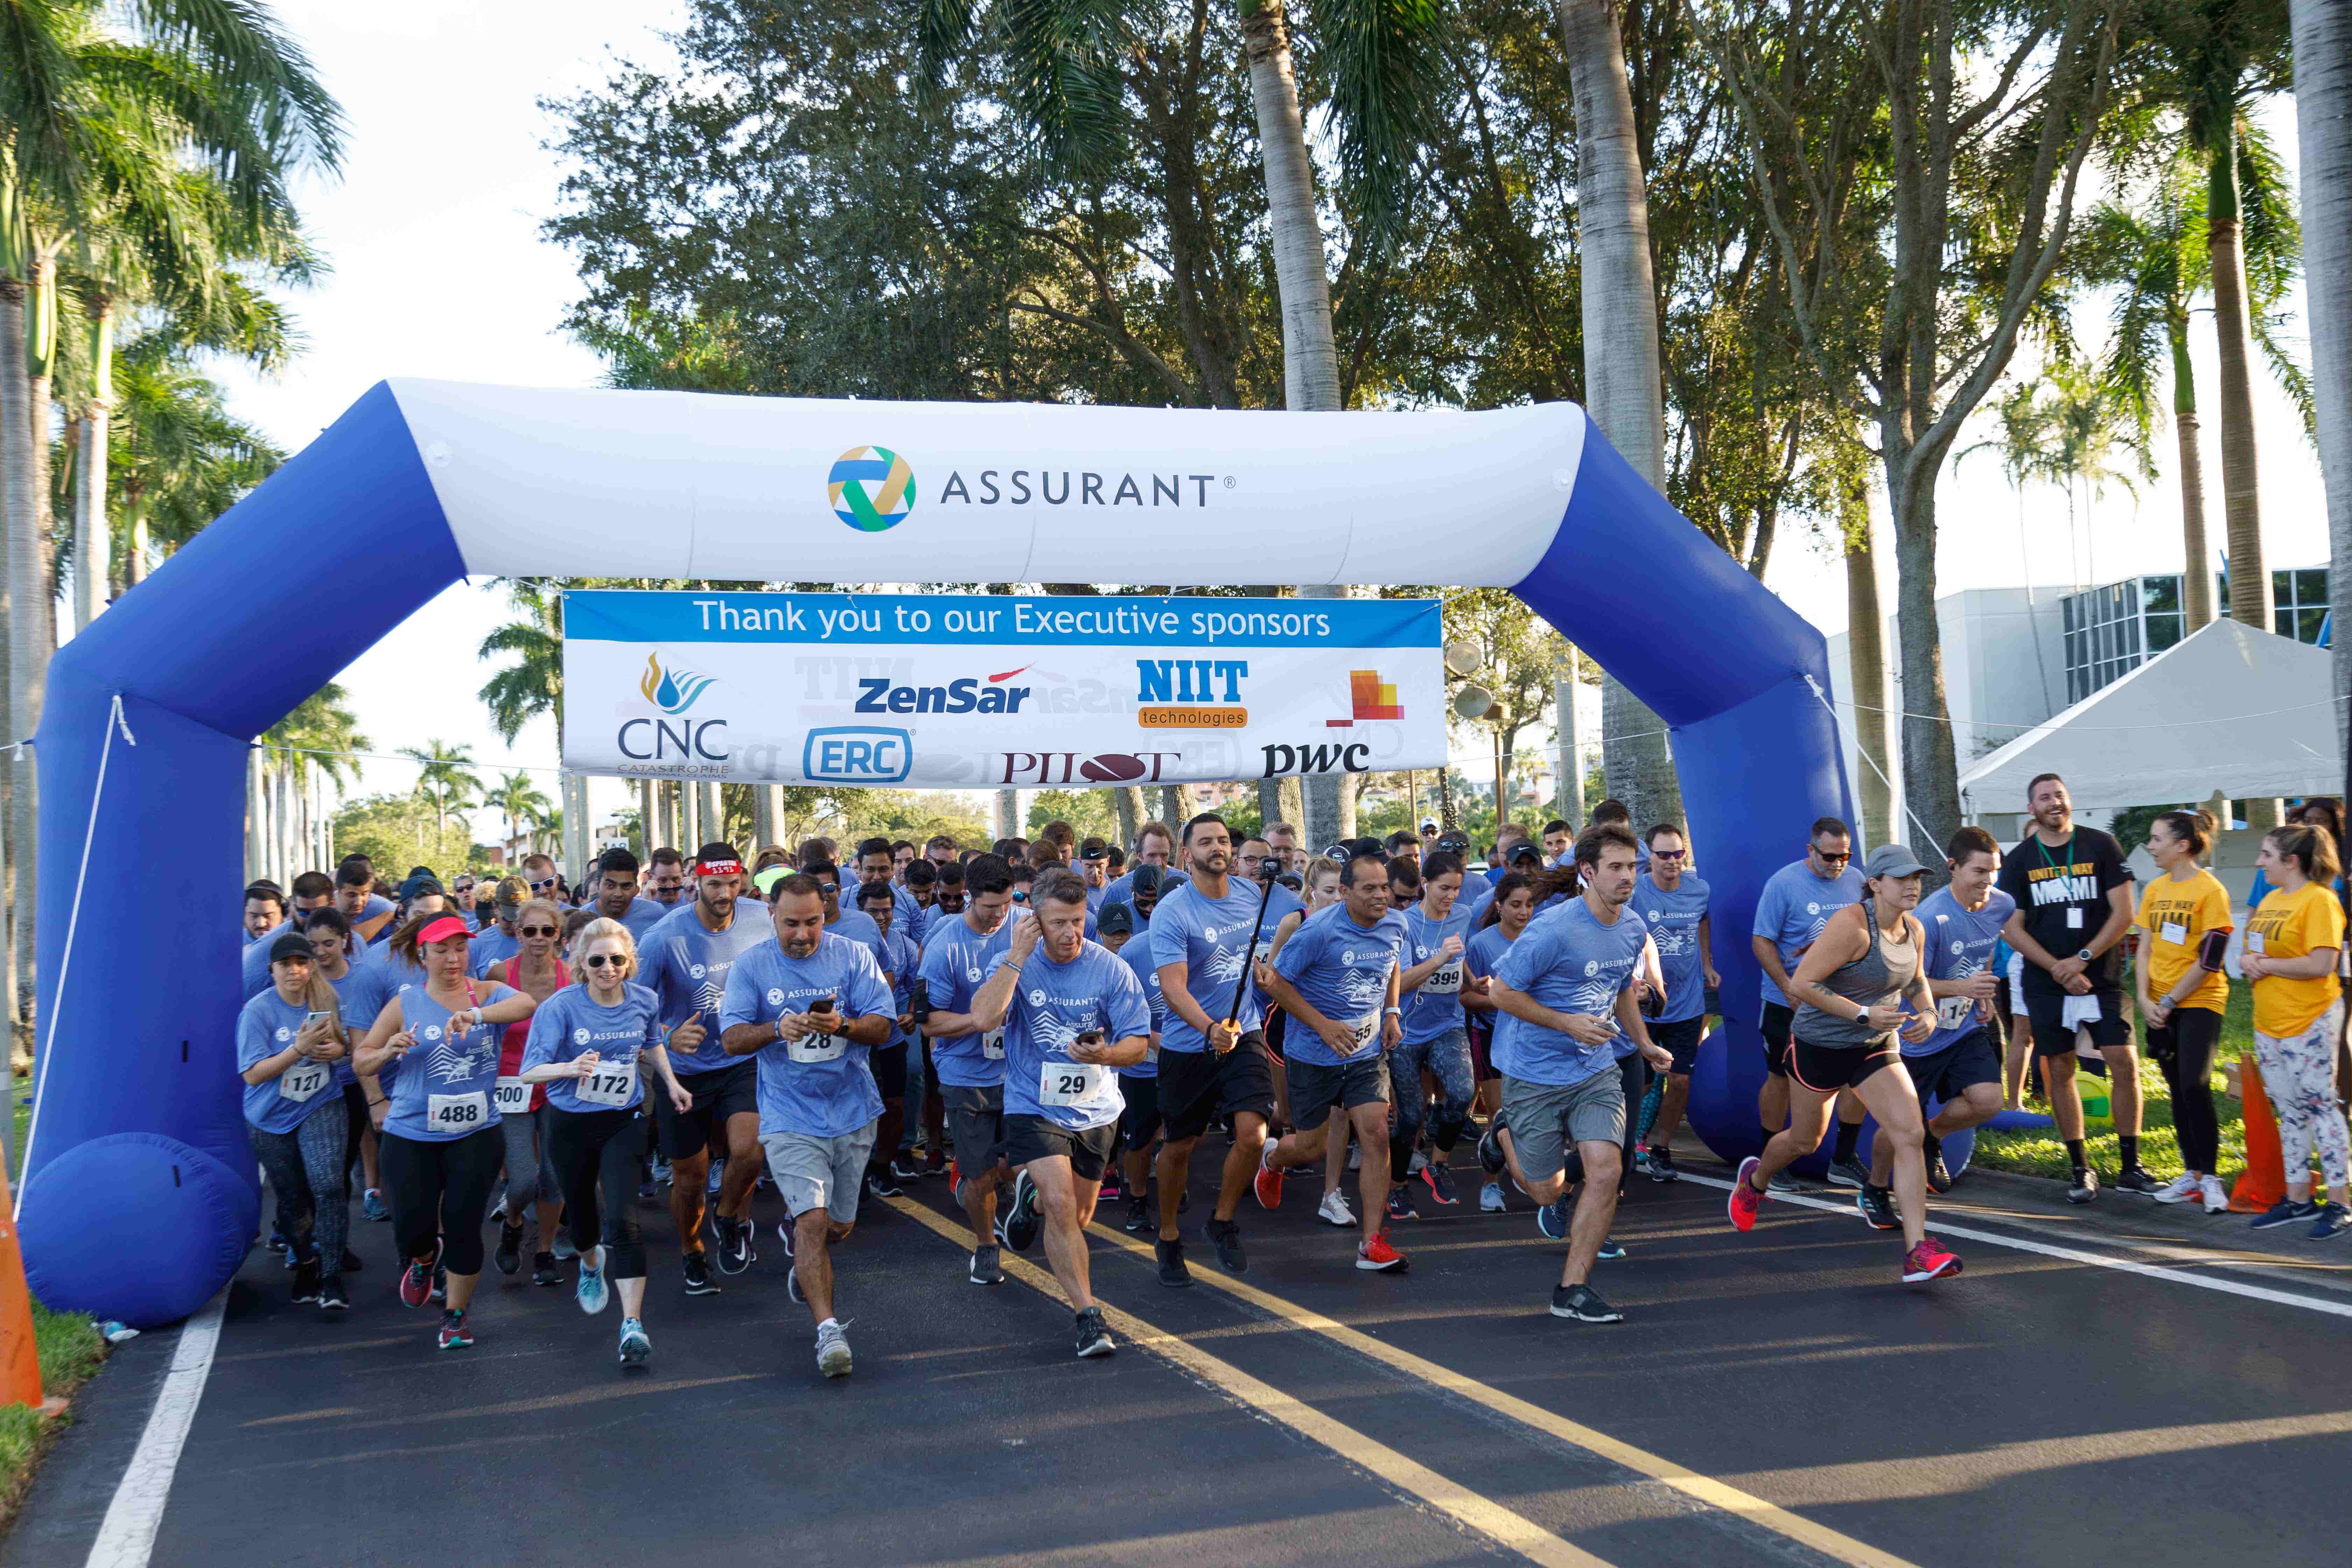 A team of Assurant employees at the starting line of a 5K race